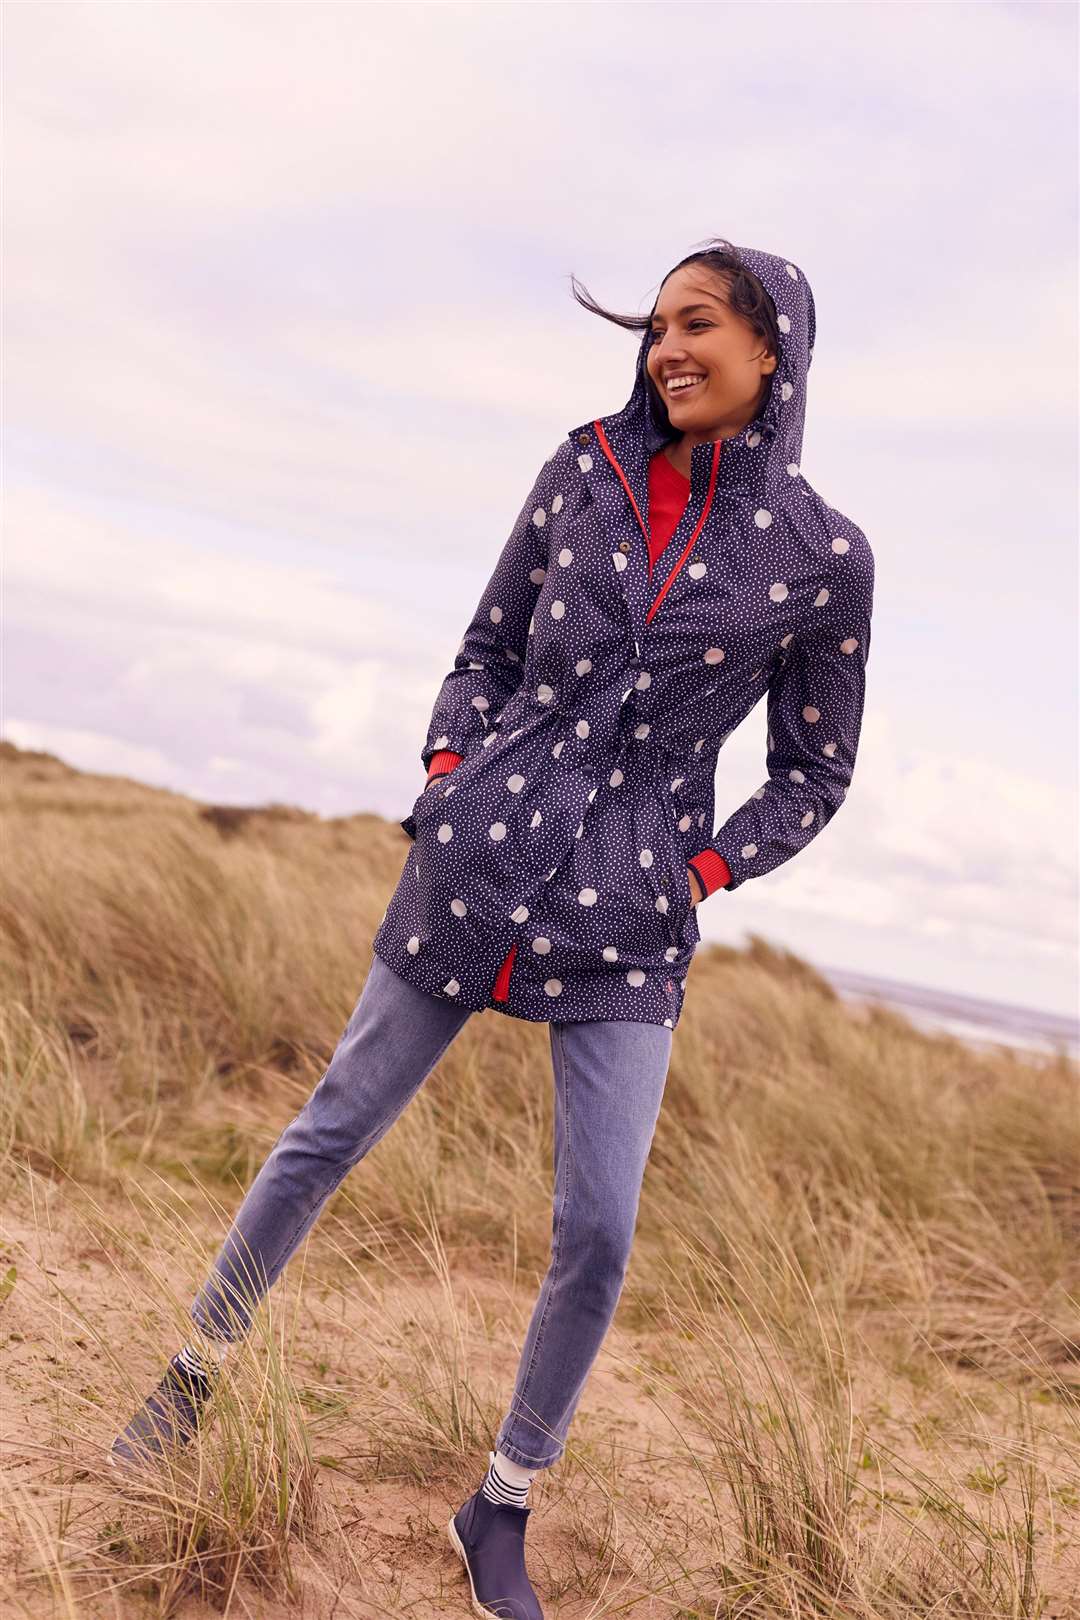 Fashion brand Joules runs 132 stores across the UK (Joules/PA)